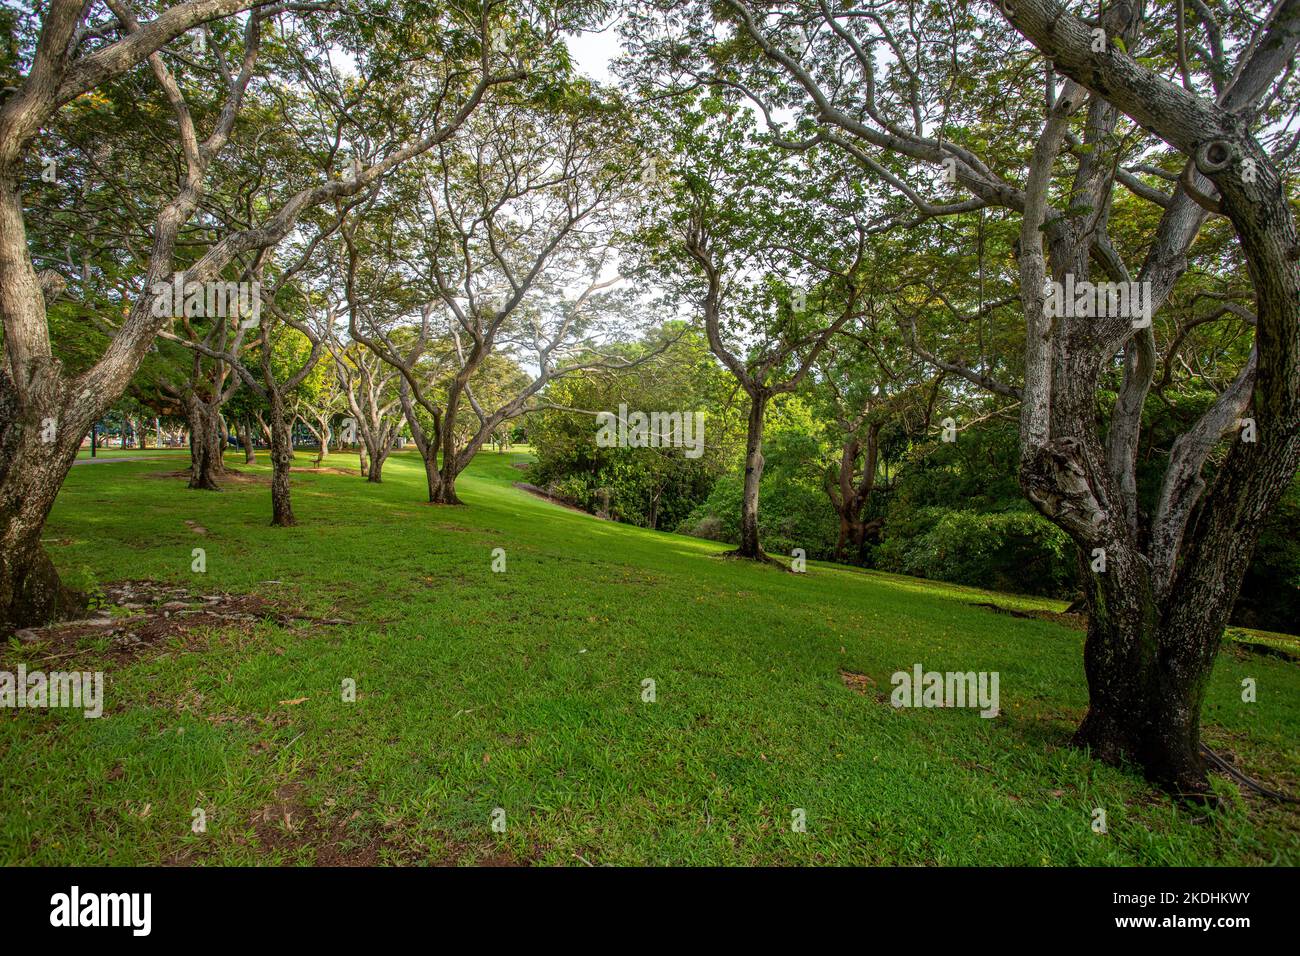 The Bicentennial Park, also called The Esplanade, is a large parkland located in Darwin city centre. Stock Photo